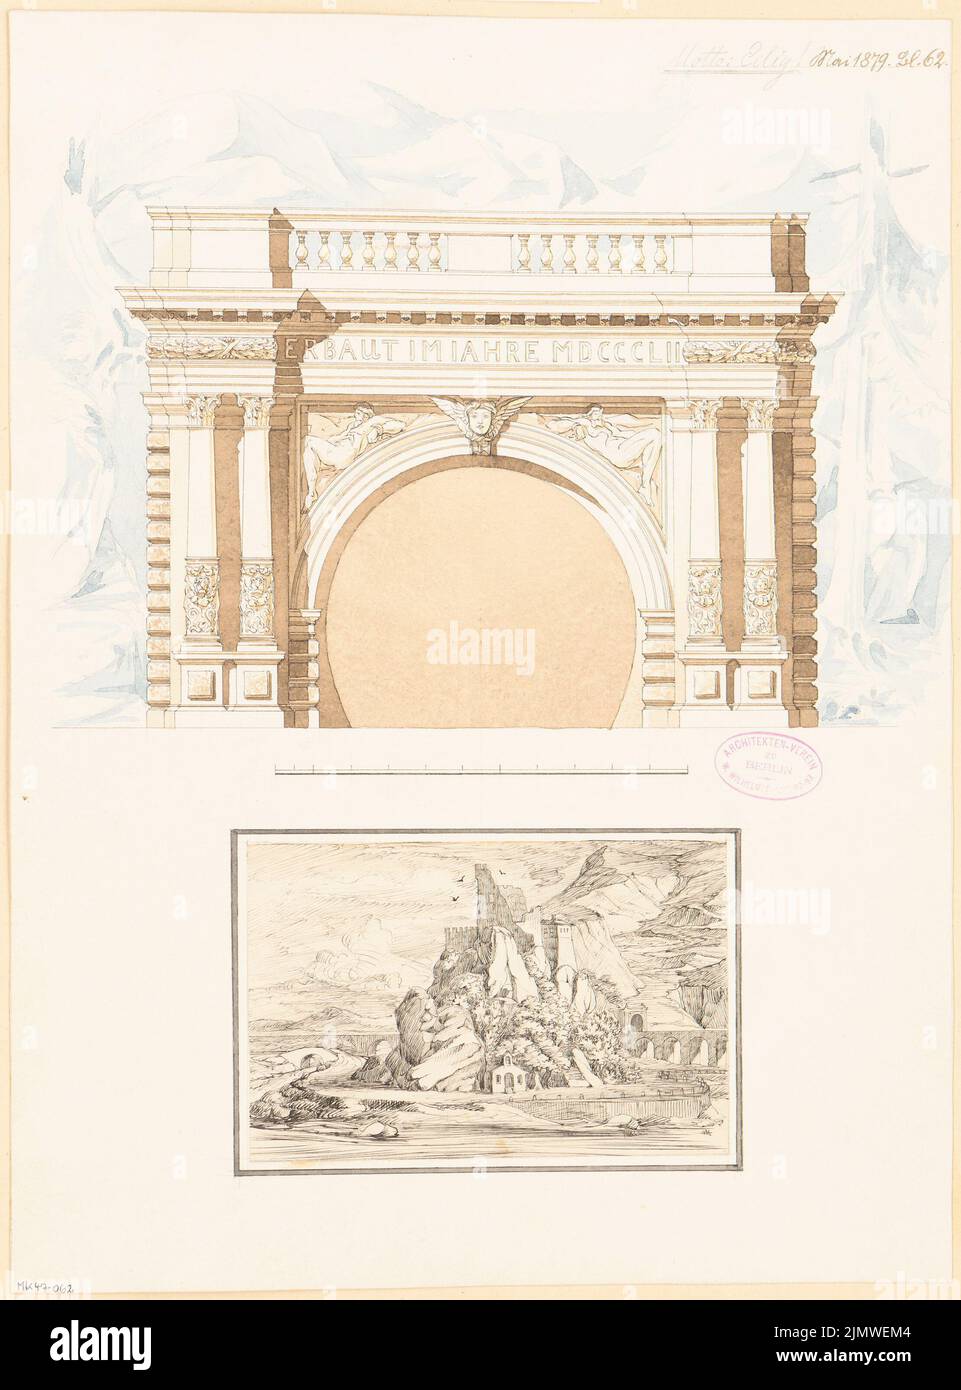 Unknown architect, tunnel portal. Monthly competition May 1879 (05.1879): Upper front view, perspective view; Scale bar. Tusche watercolor on the box, 45.6 x 33.7 cm (including scan edges) N.N. : Tunnelportal. Monatskonkurrenz Mai 1879 Stock Photo